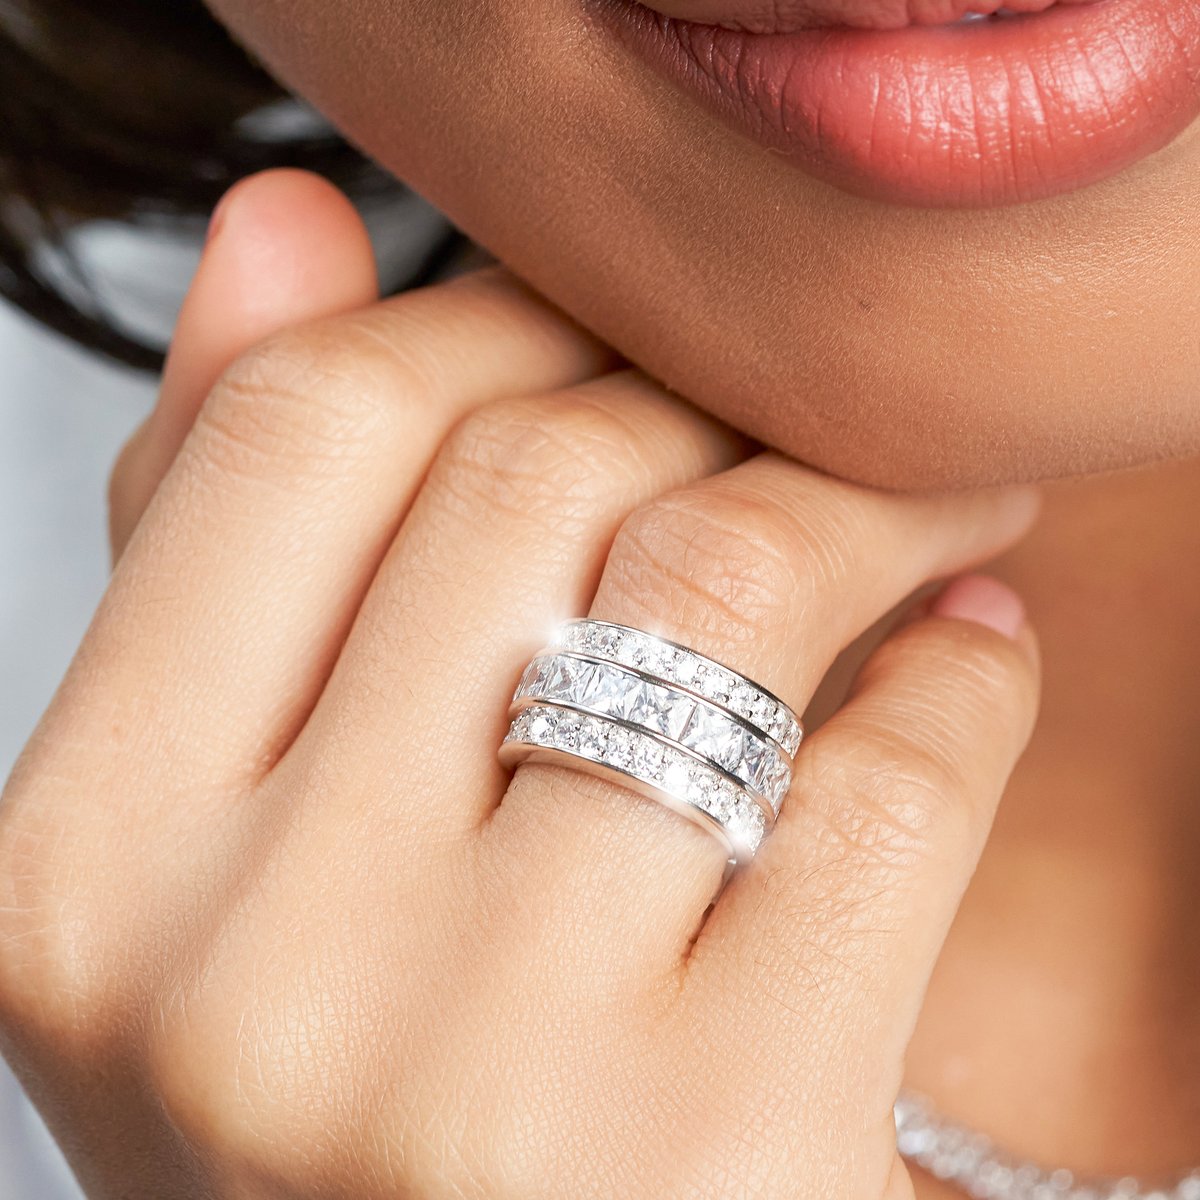 How gorgeous is this one?

Round & Princess Cut Half Eternity Ring

💍🎁 SHOP NOW > bit.ly/37zk2M8

#womenrings #weddingrings #lovejewelry #silverjewelry #sterlingsilver #cubiczirconia #besttohave #besttohavejewelry #silverring #zirconia #silver925 #engagement #wedding